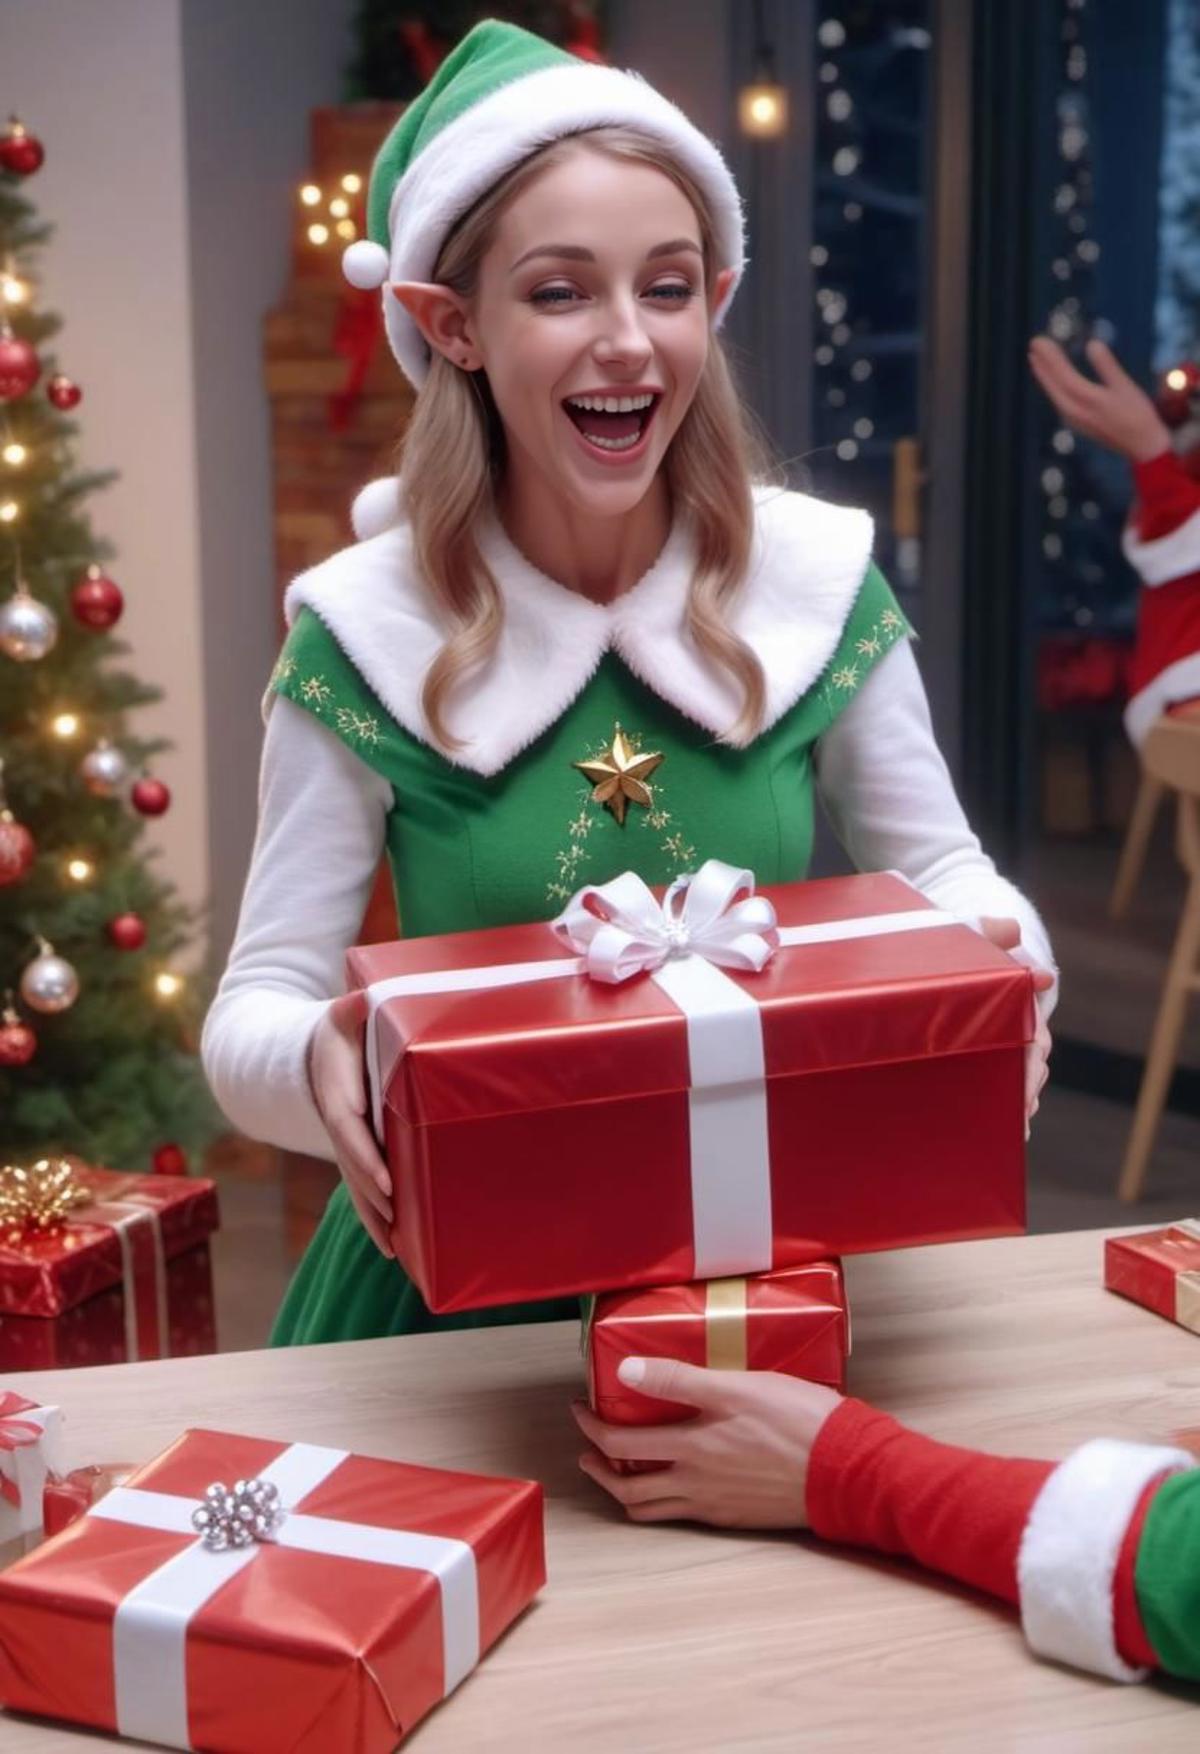 Woman in elf costume holding a red gift box and laughing.